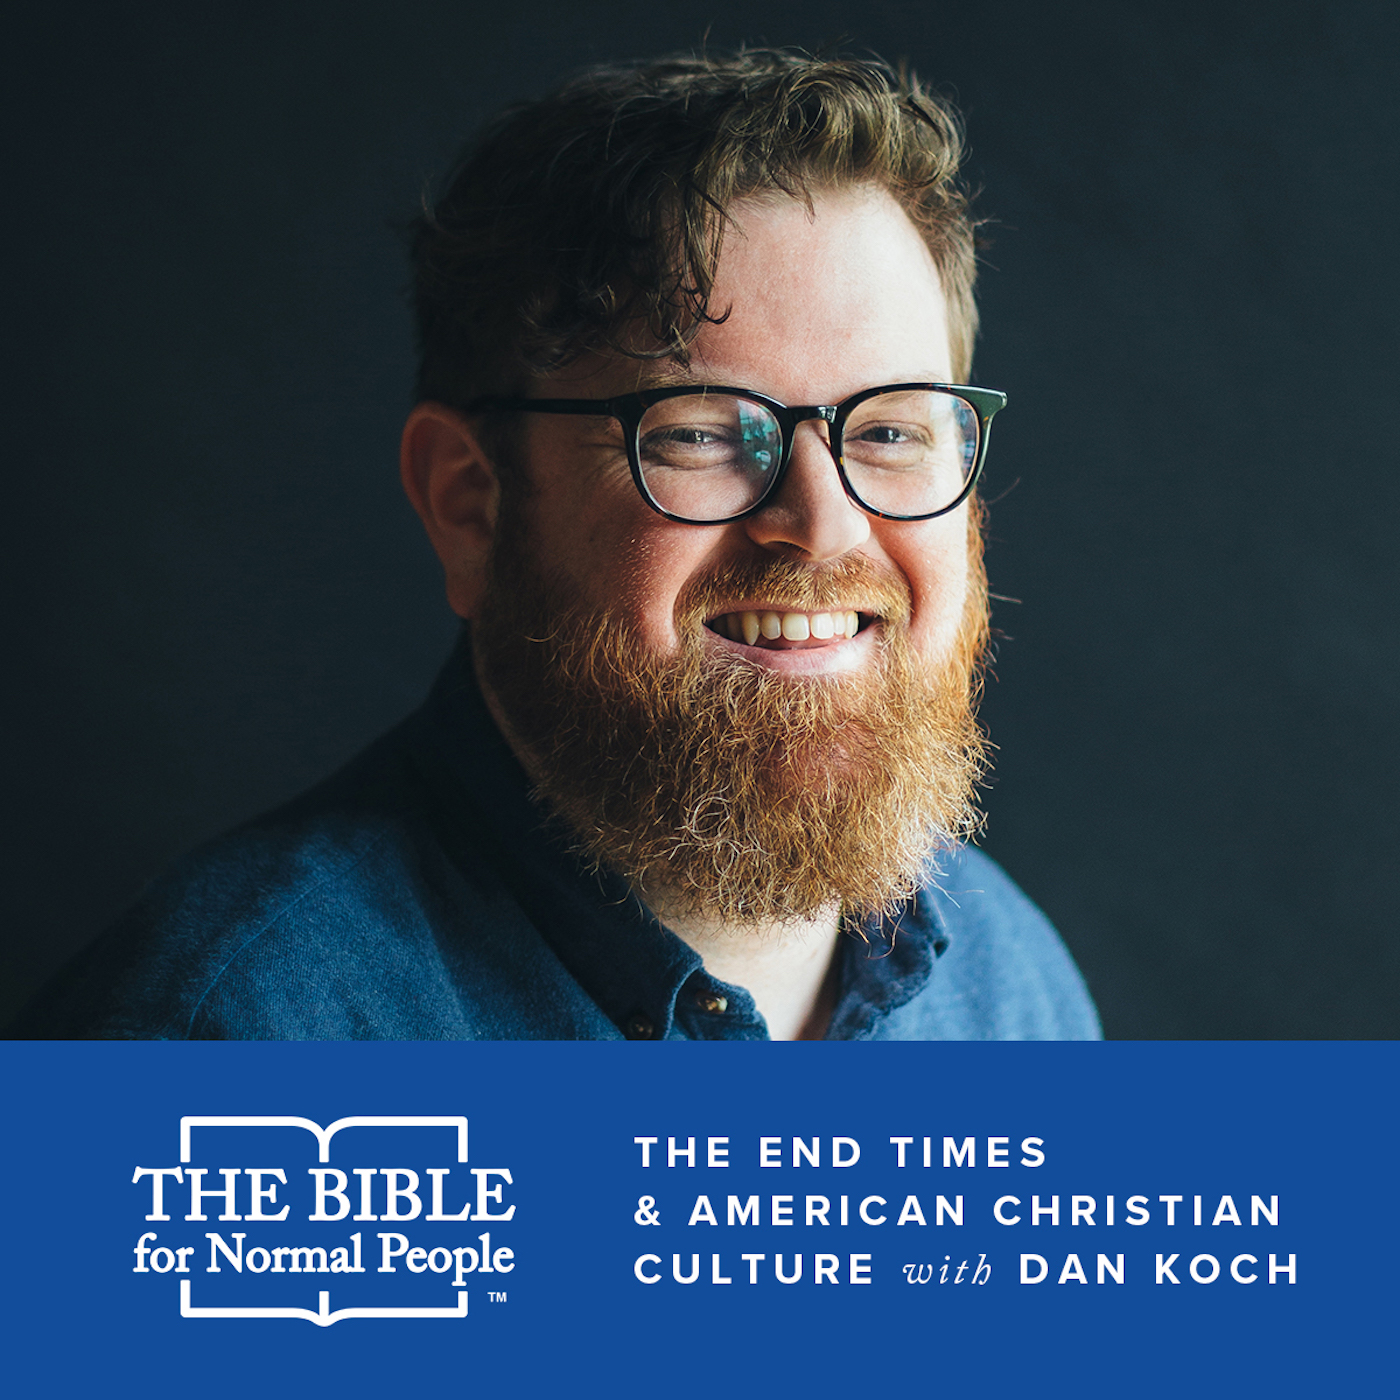 Interview with Dan Koch: The End Times & American Christian Culture